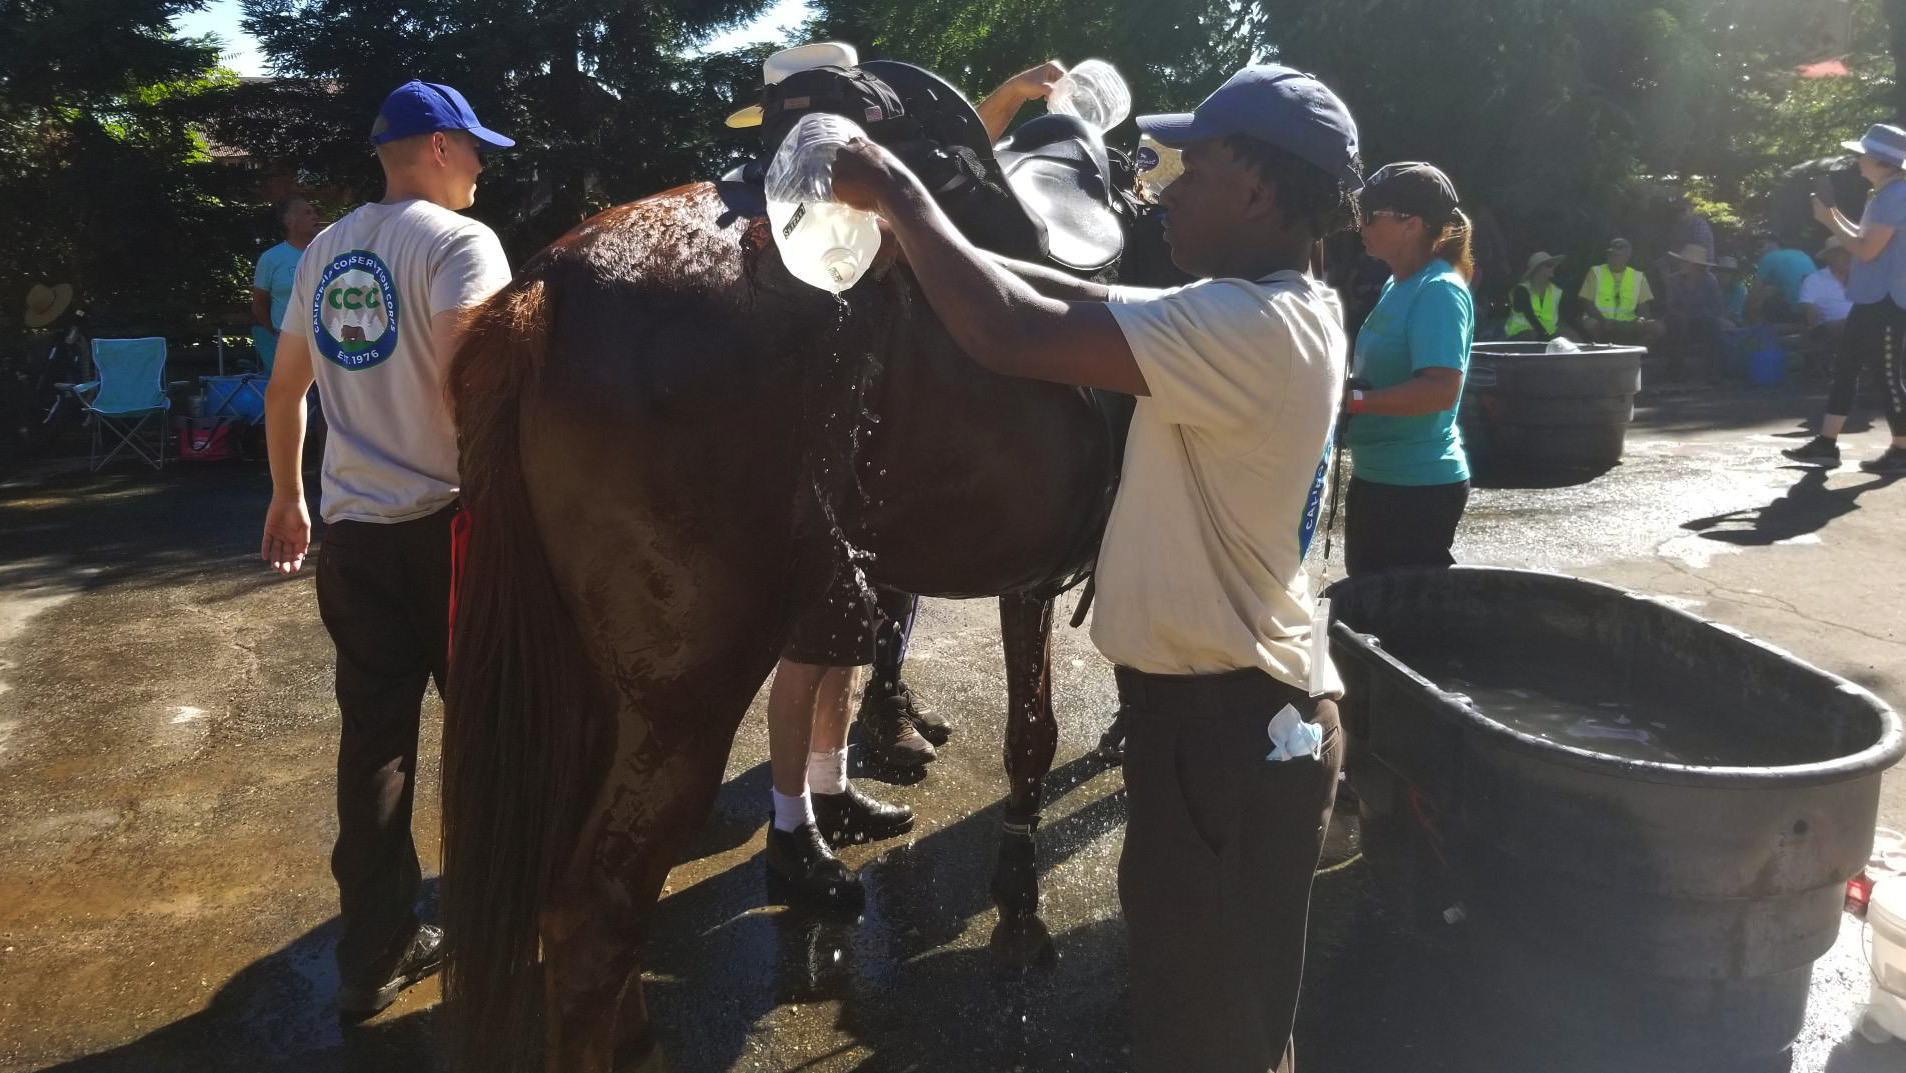 corpsmember pours water on a horse during volunteer event